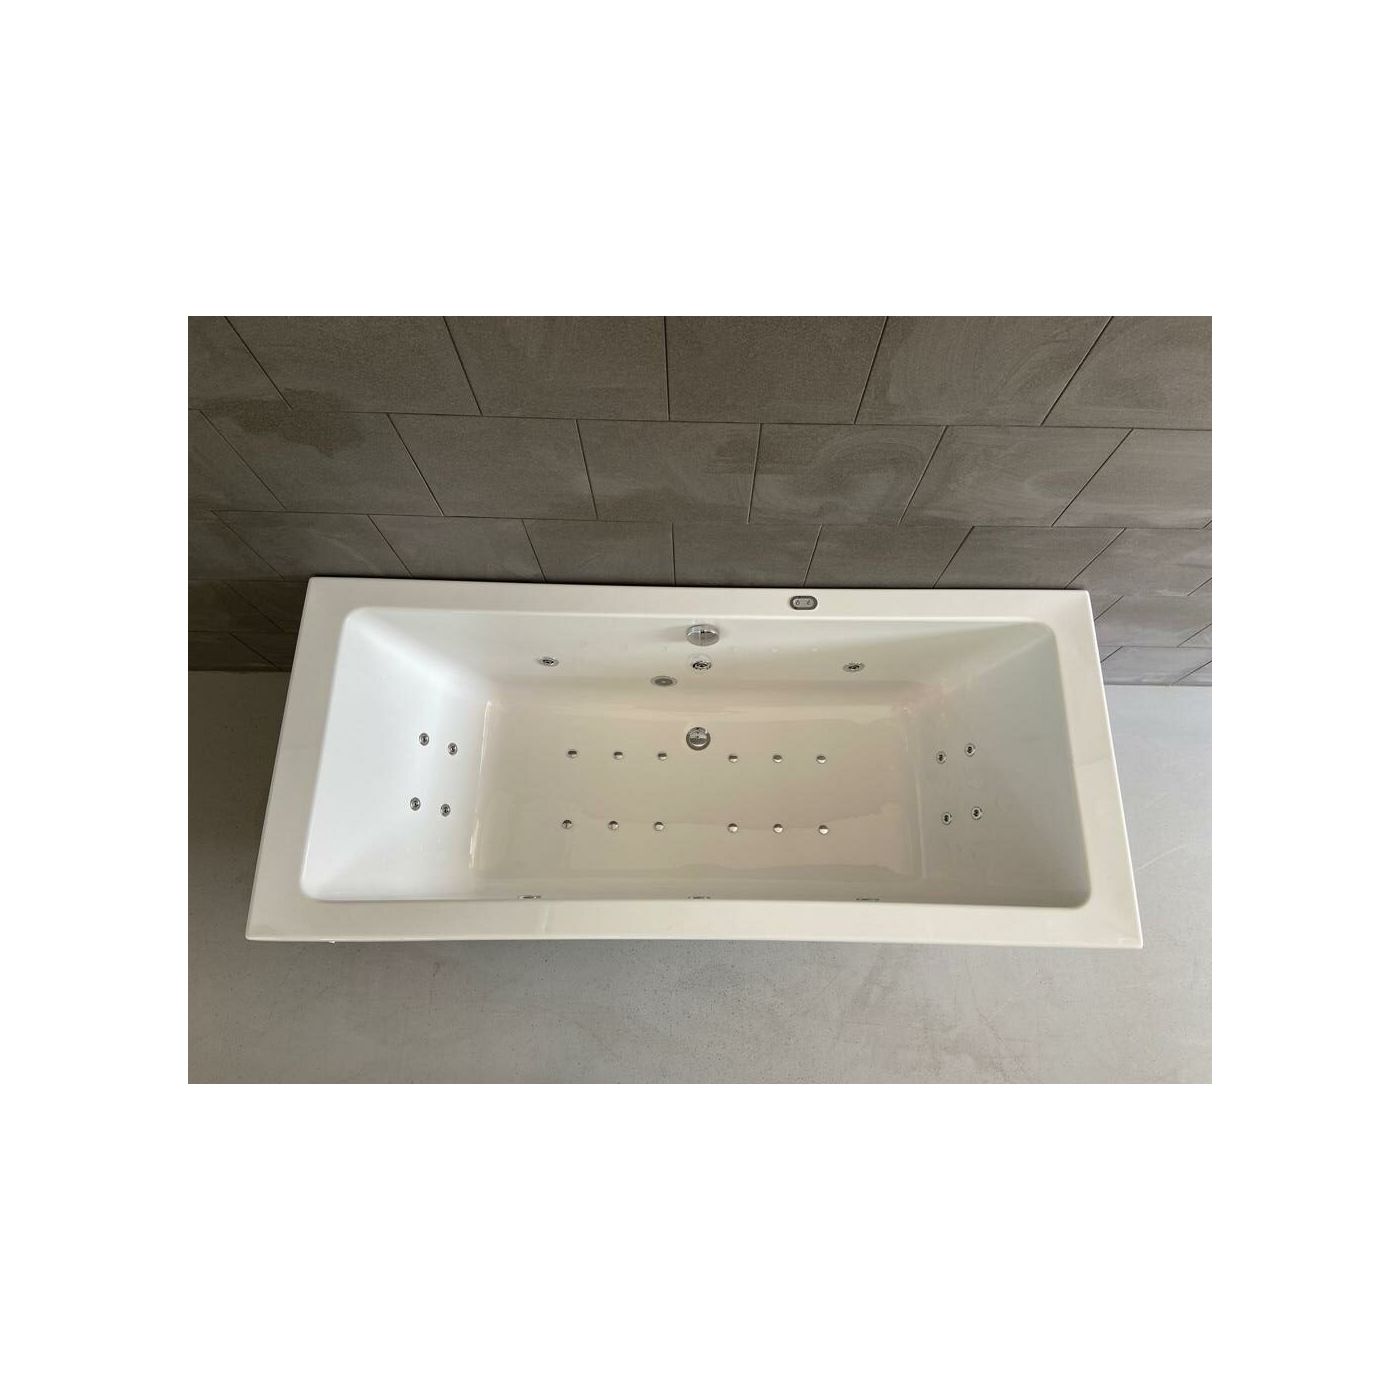 Xenz Society bubbelbad met Koller Basic systeem 180x80 wit